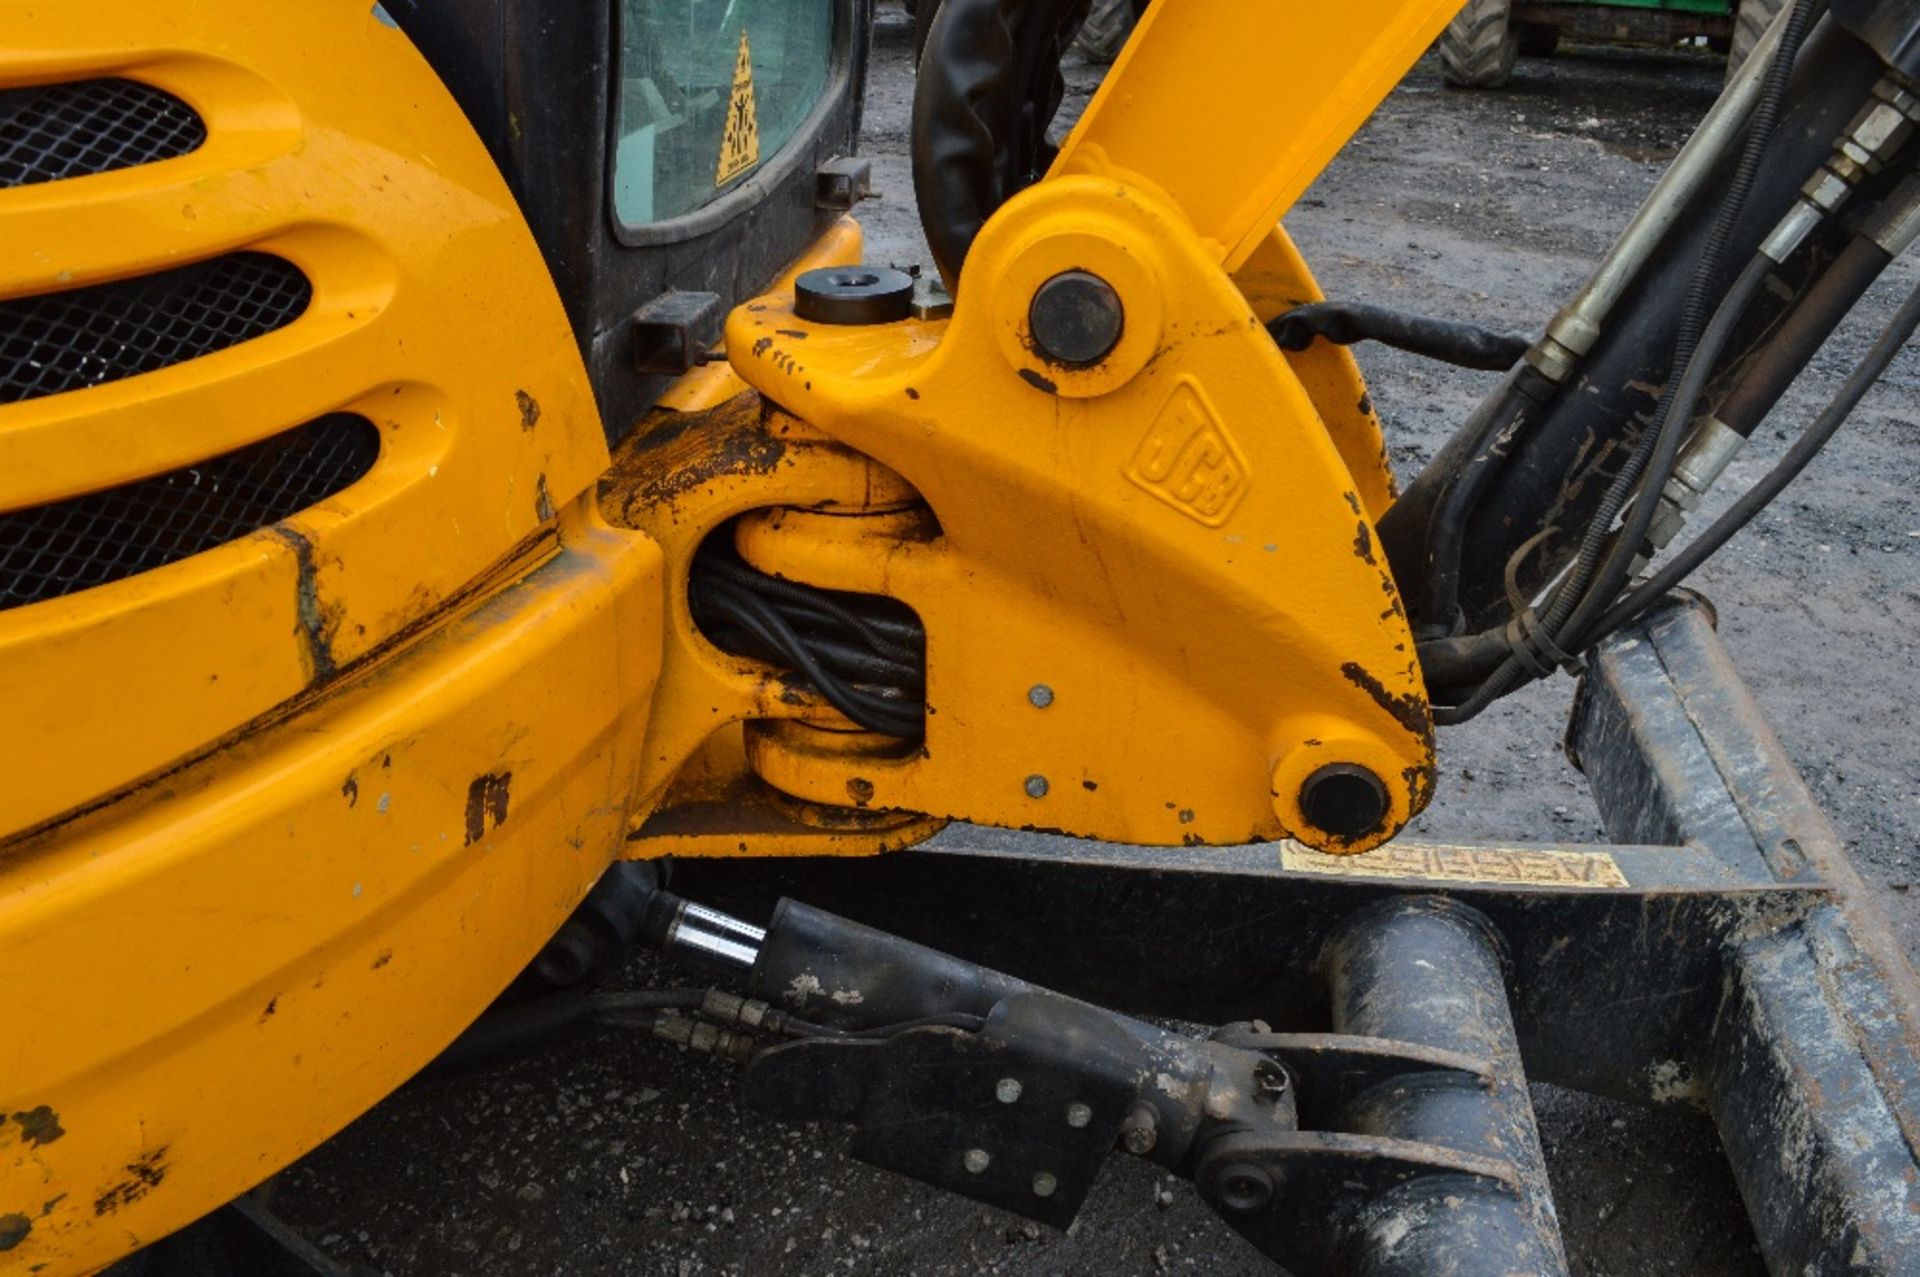 JCB 8050 RTS 5 tonne reduced tail swing rubber tracked mini excavator
Year: 2011
S/N: 1741664 - Image 9 of 12